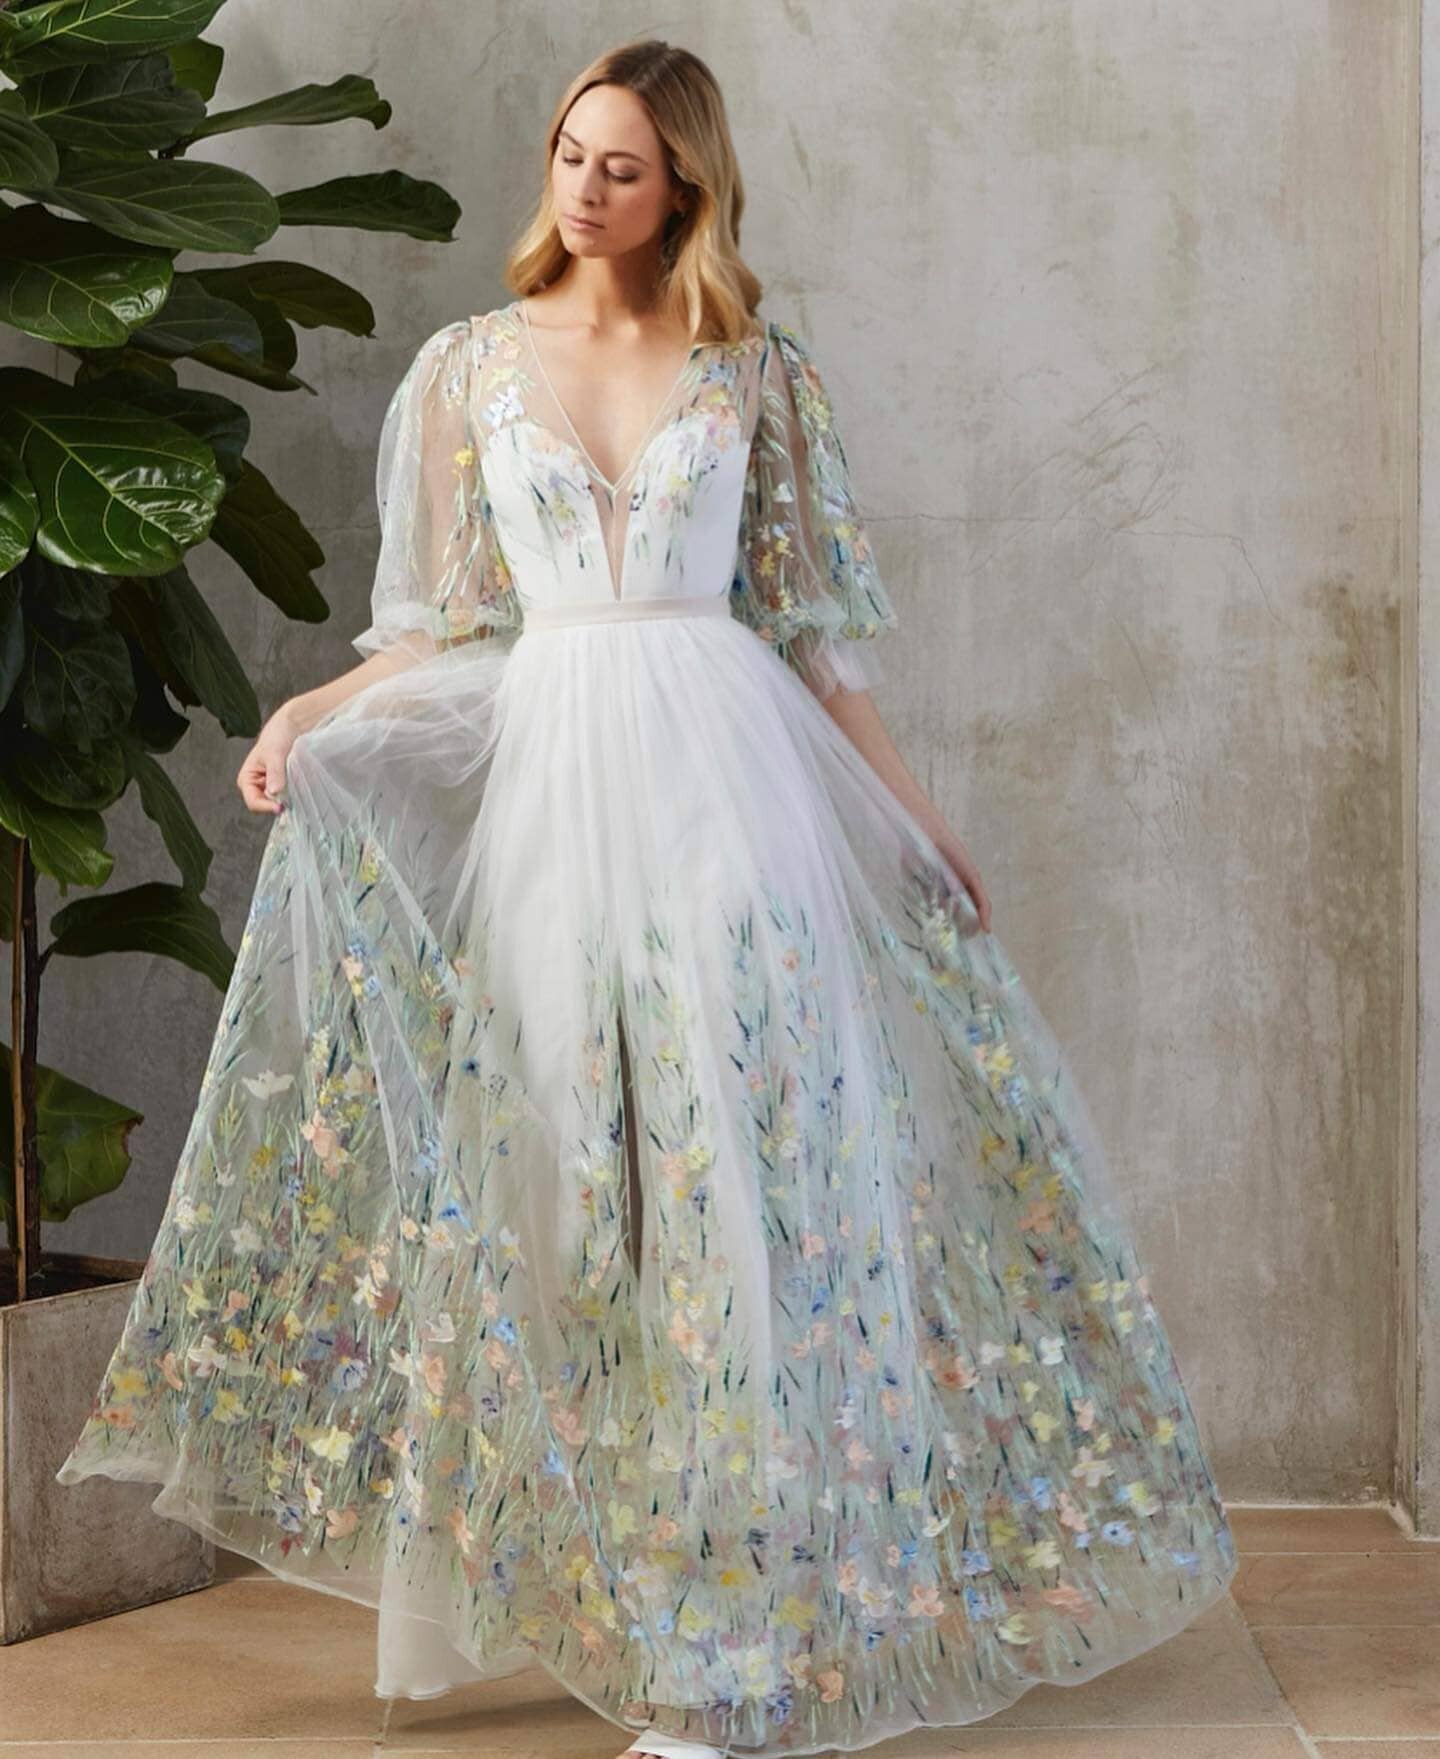 Wow! We just had to share this floaty, ethereal work of art 🌿

This beautiful dress 'Catalina' from the Springtime collection by @savinlondon is launching exclusively at @laceandcobridal (Horbury, Wakefield) today.

Who is ready to go dress shopping